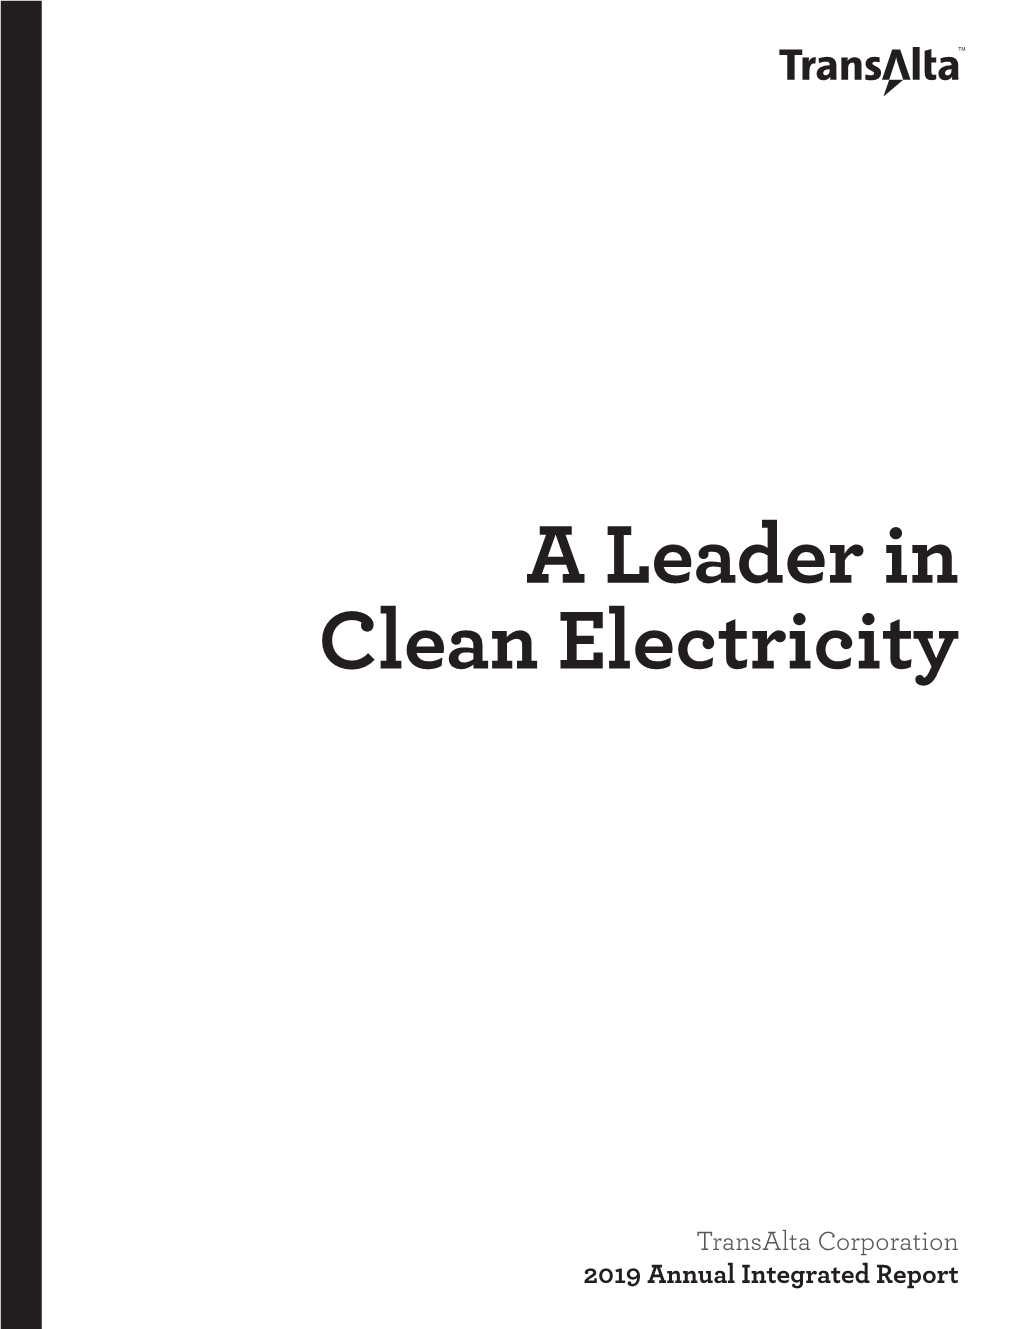 A Leader in Clean Electricity